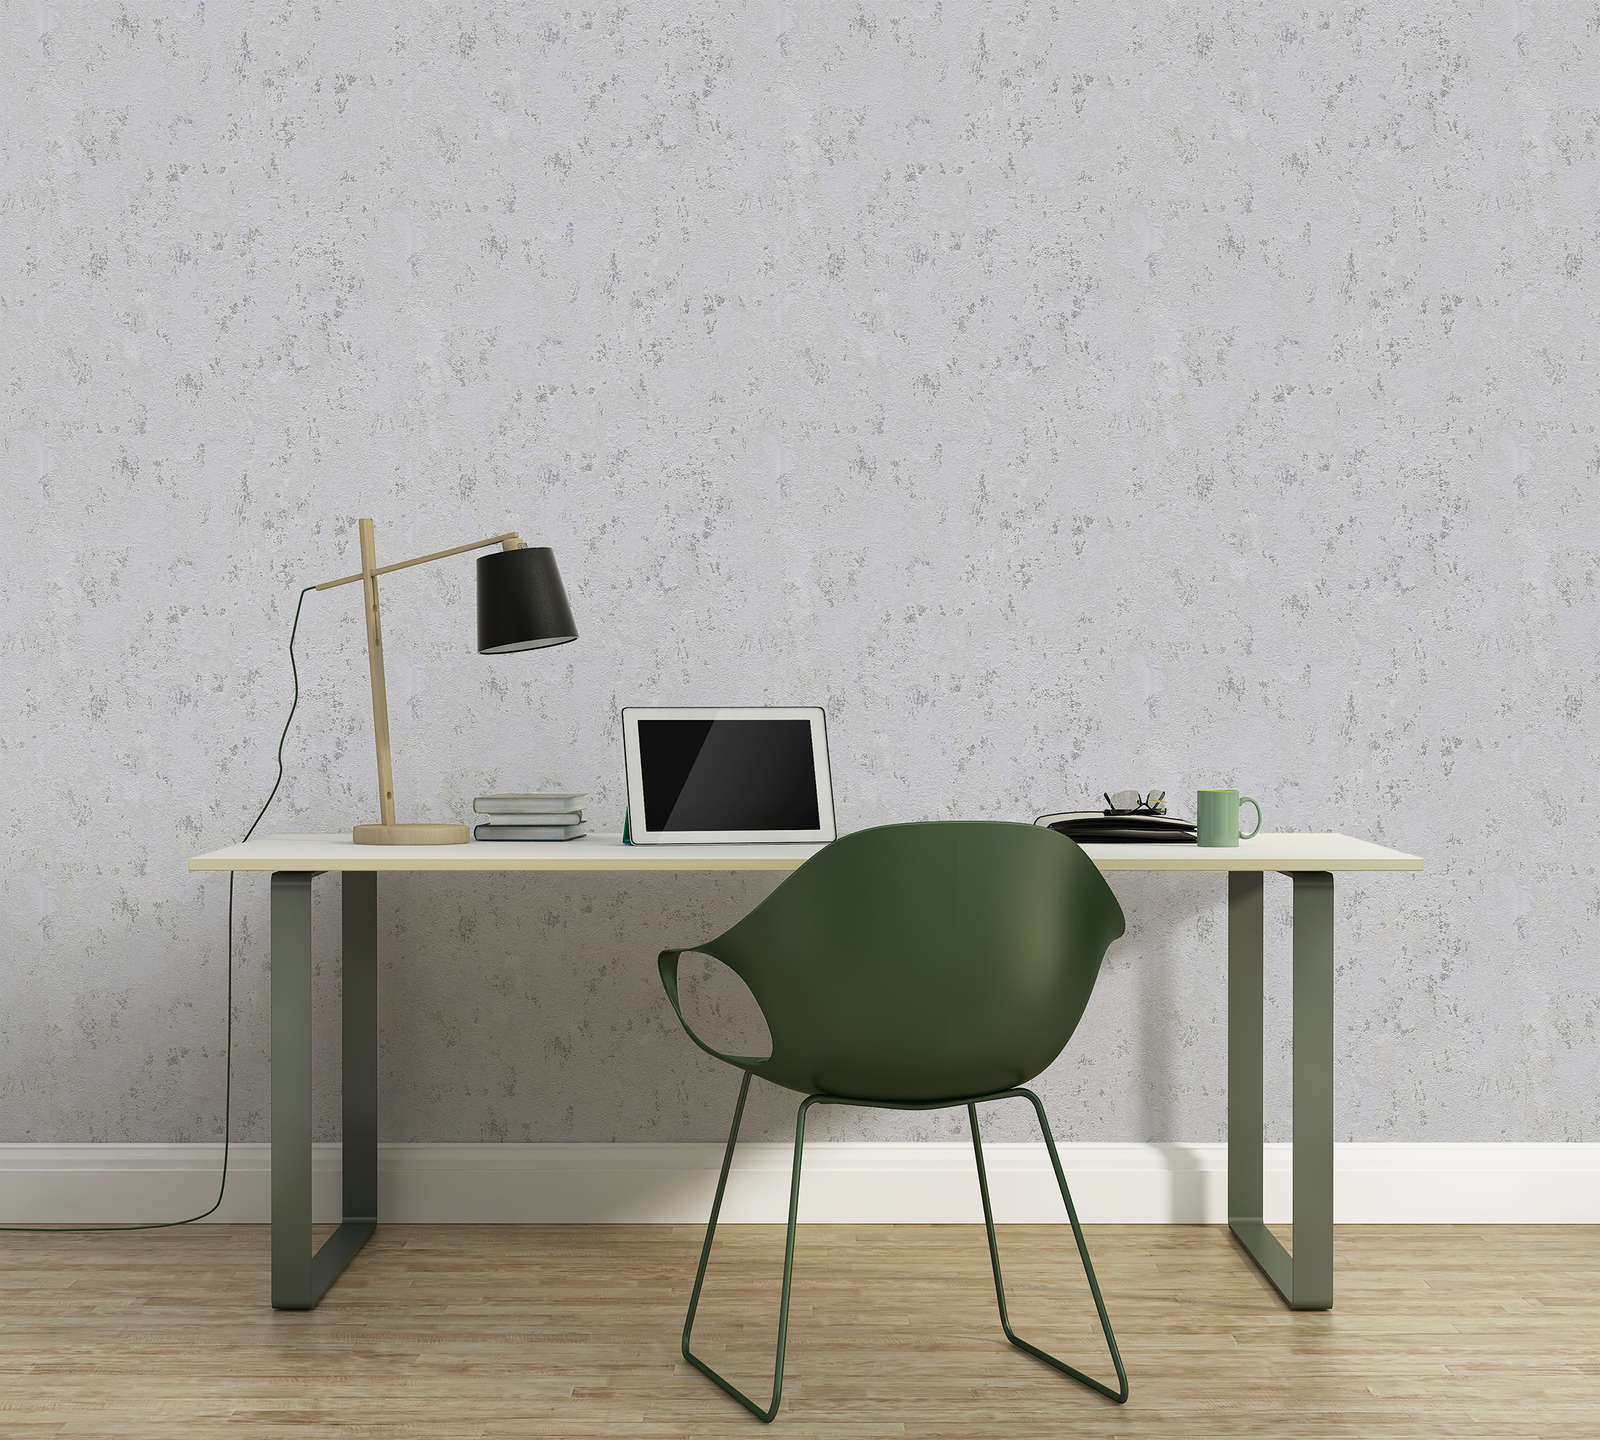             Wallpaper in a coarse plaster look with accents - grey, silver, metallic
        